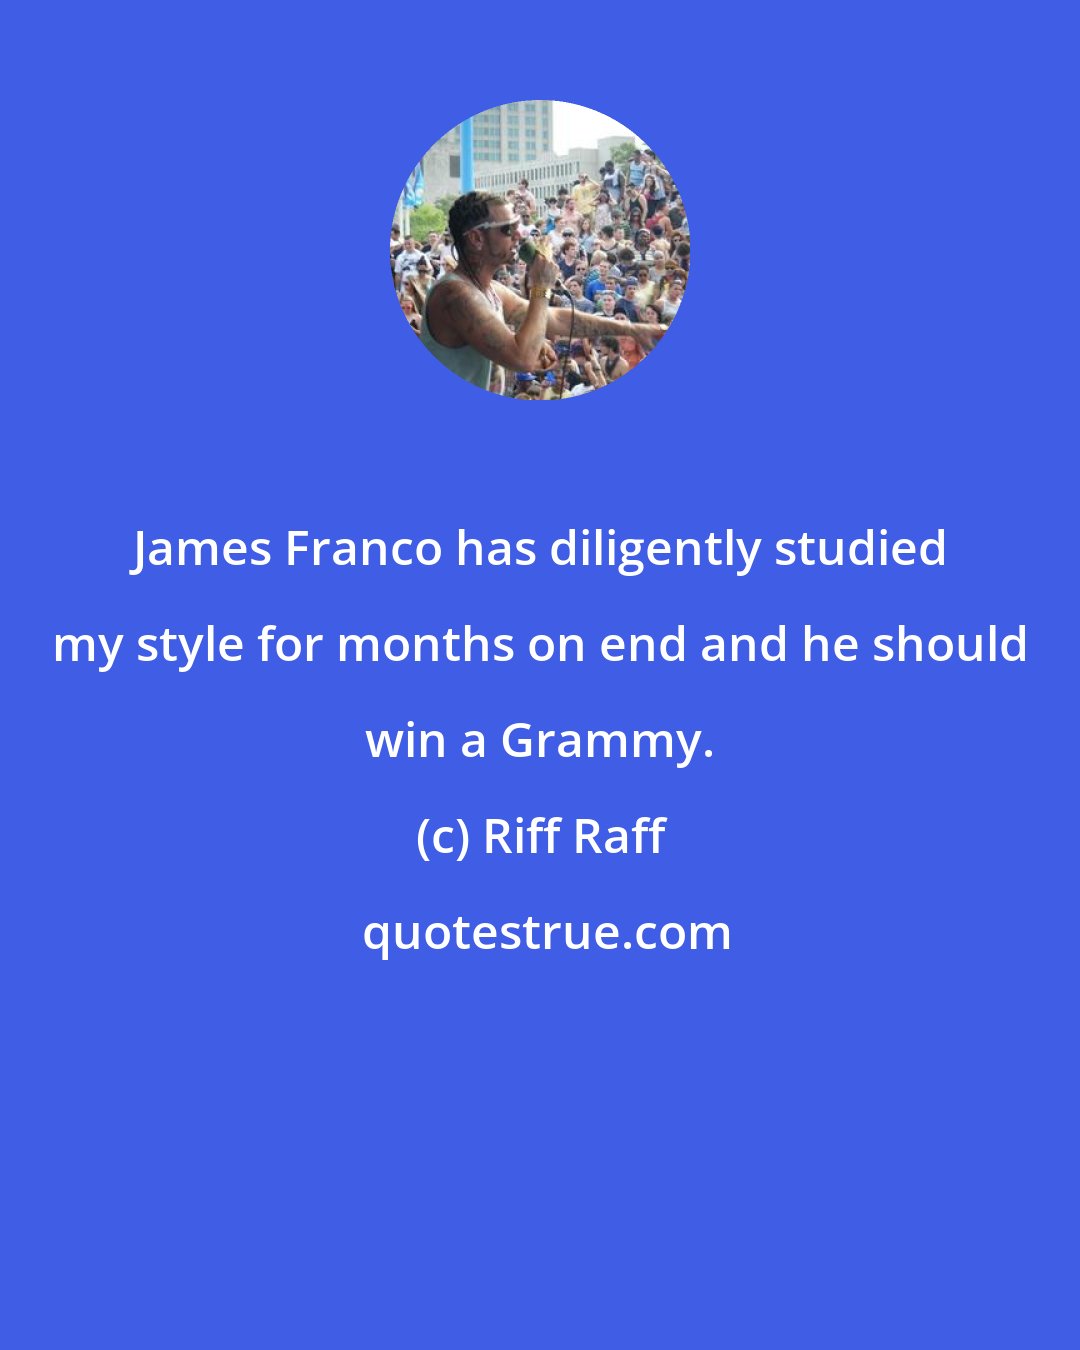 Riff Raff: James Franco has diligently studied my style for months on end and he should win a Grammy.